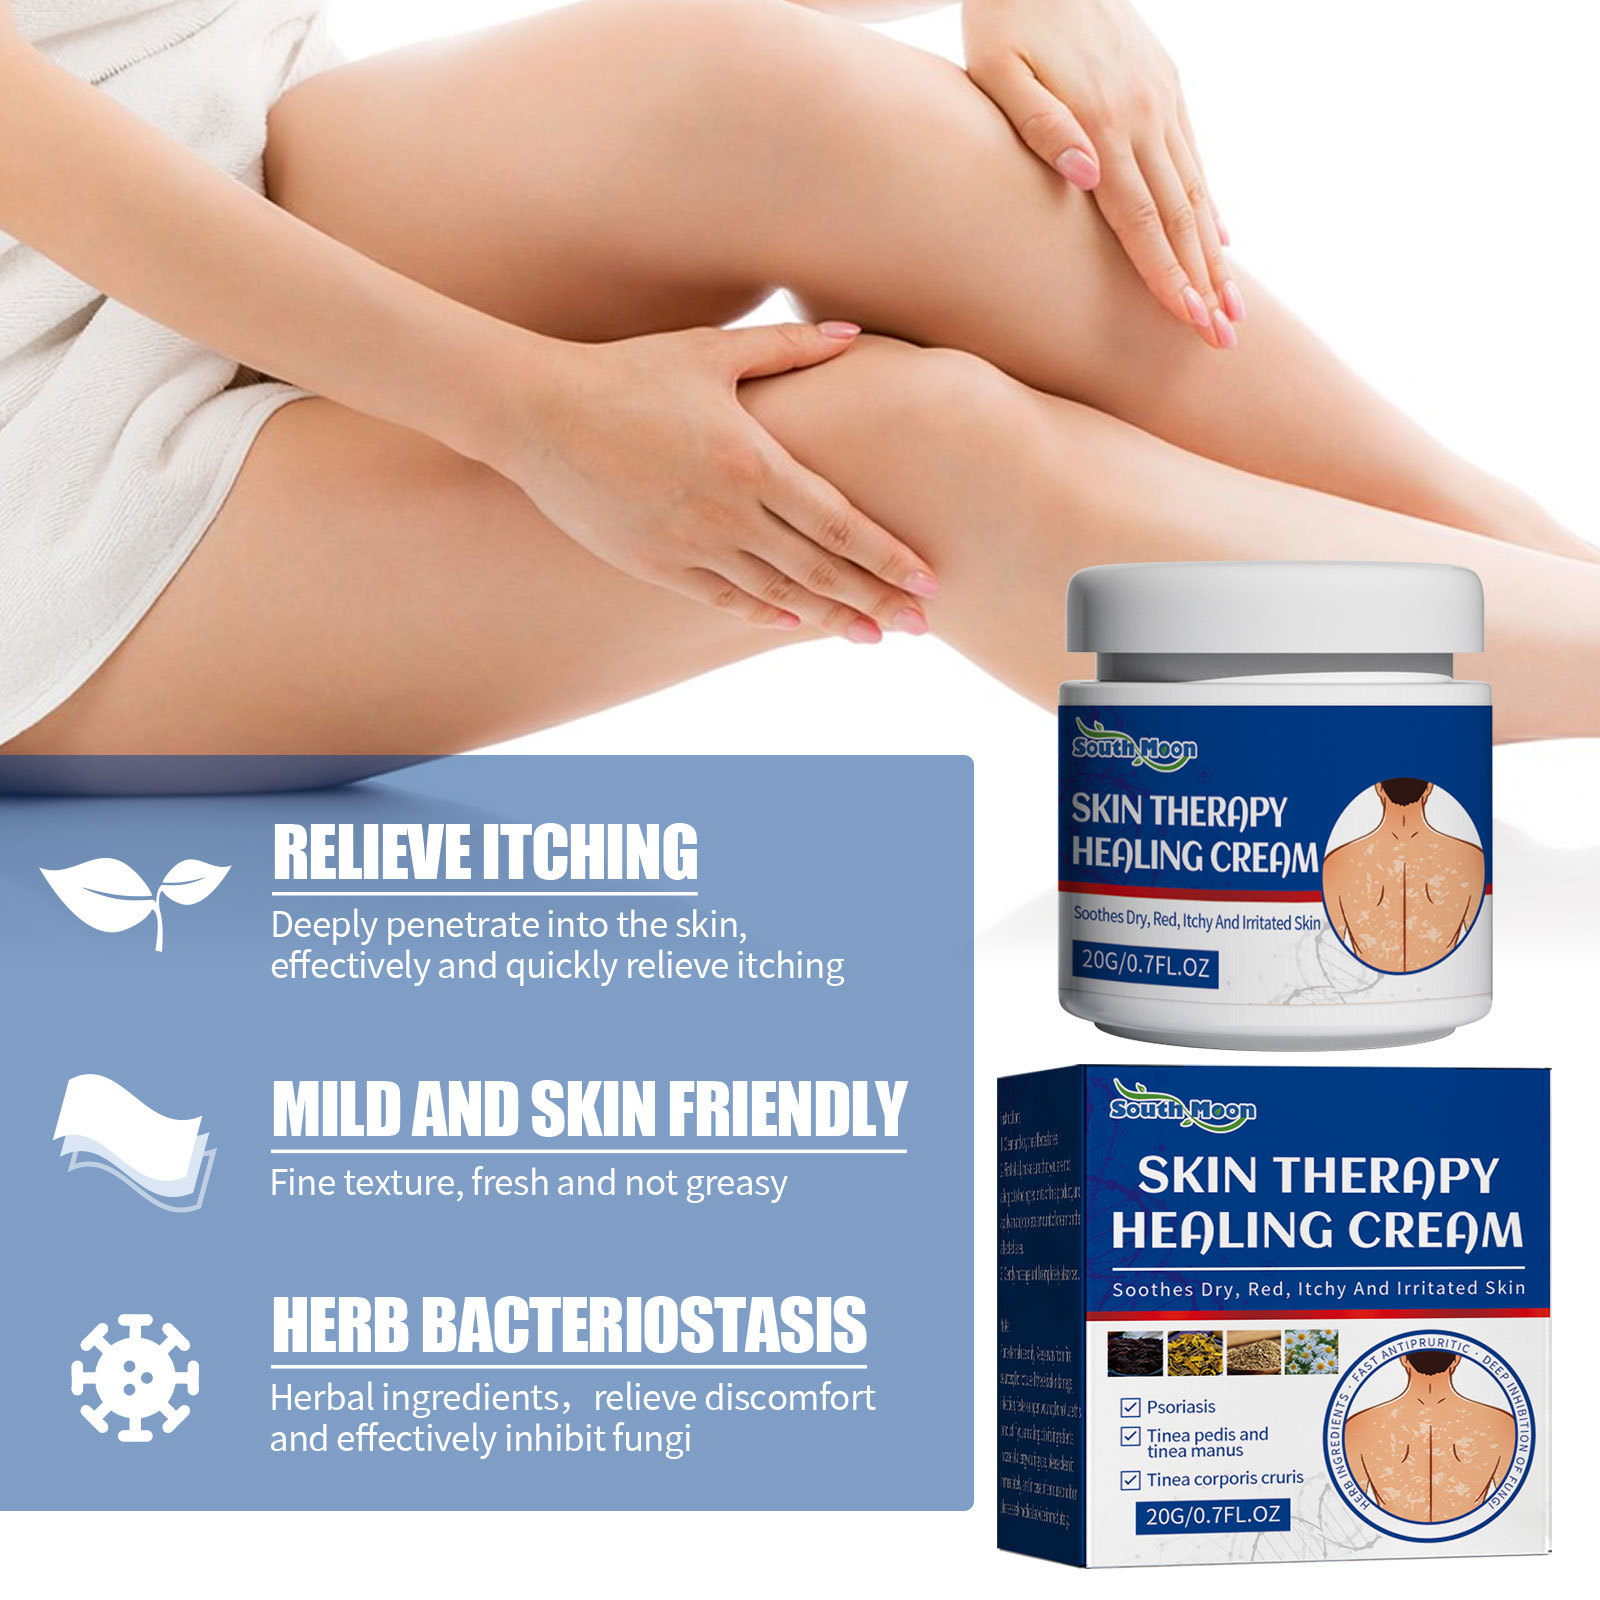 South Moon Skin Repair Cream for Relieving Itching Body Redness Itching Repair Skin Moss Skin Topical Ointment